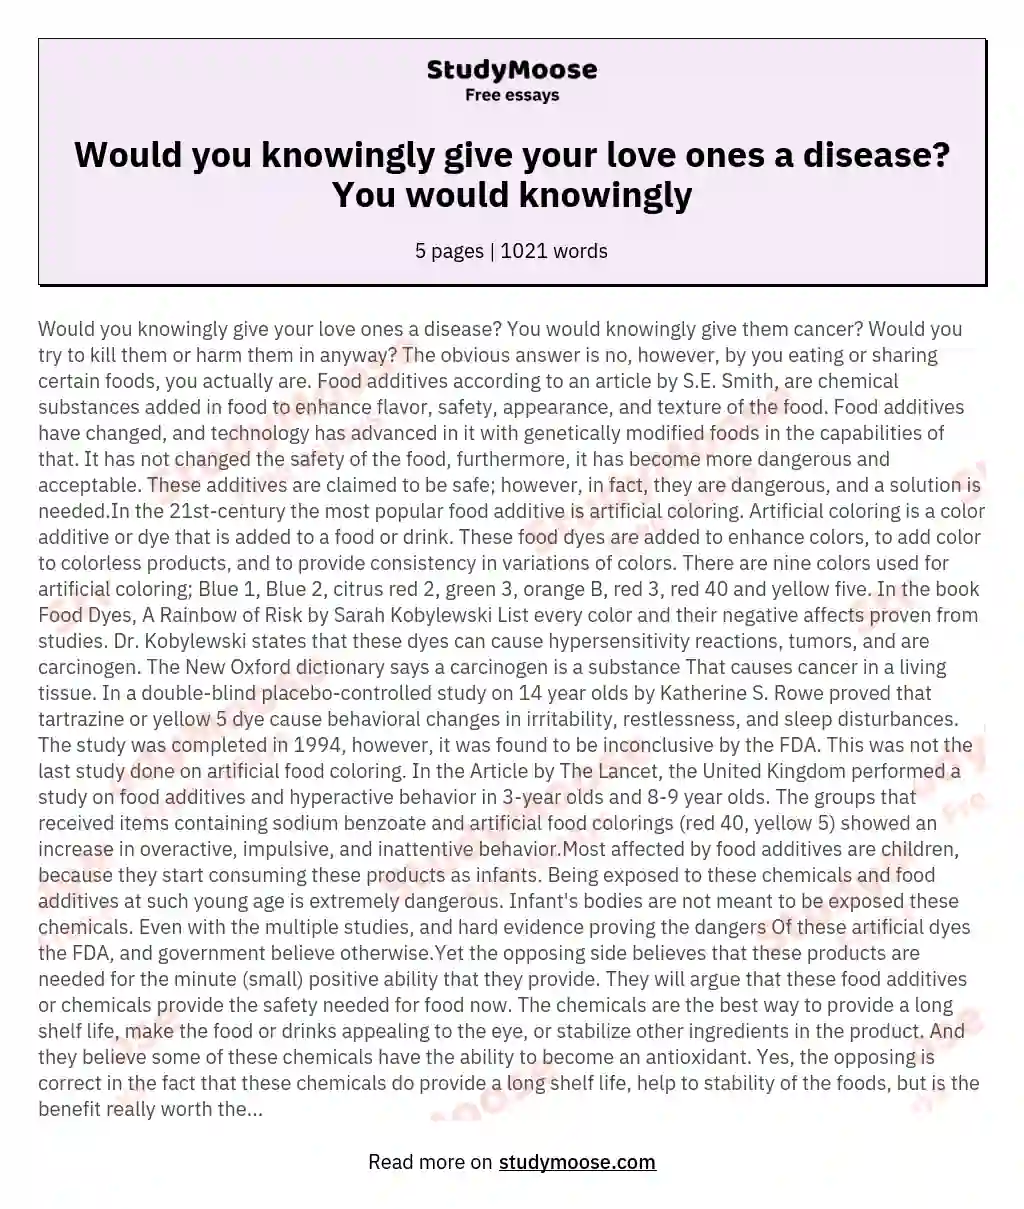 Would you knowingly give your love ones a disease? You would knowingly